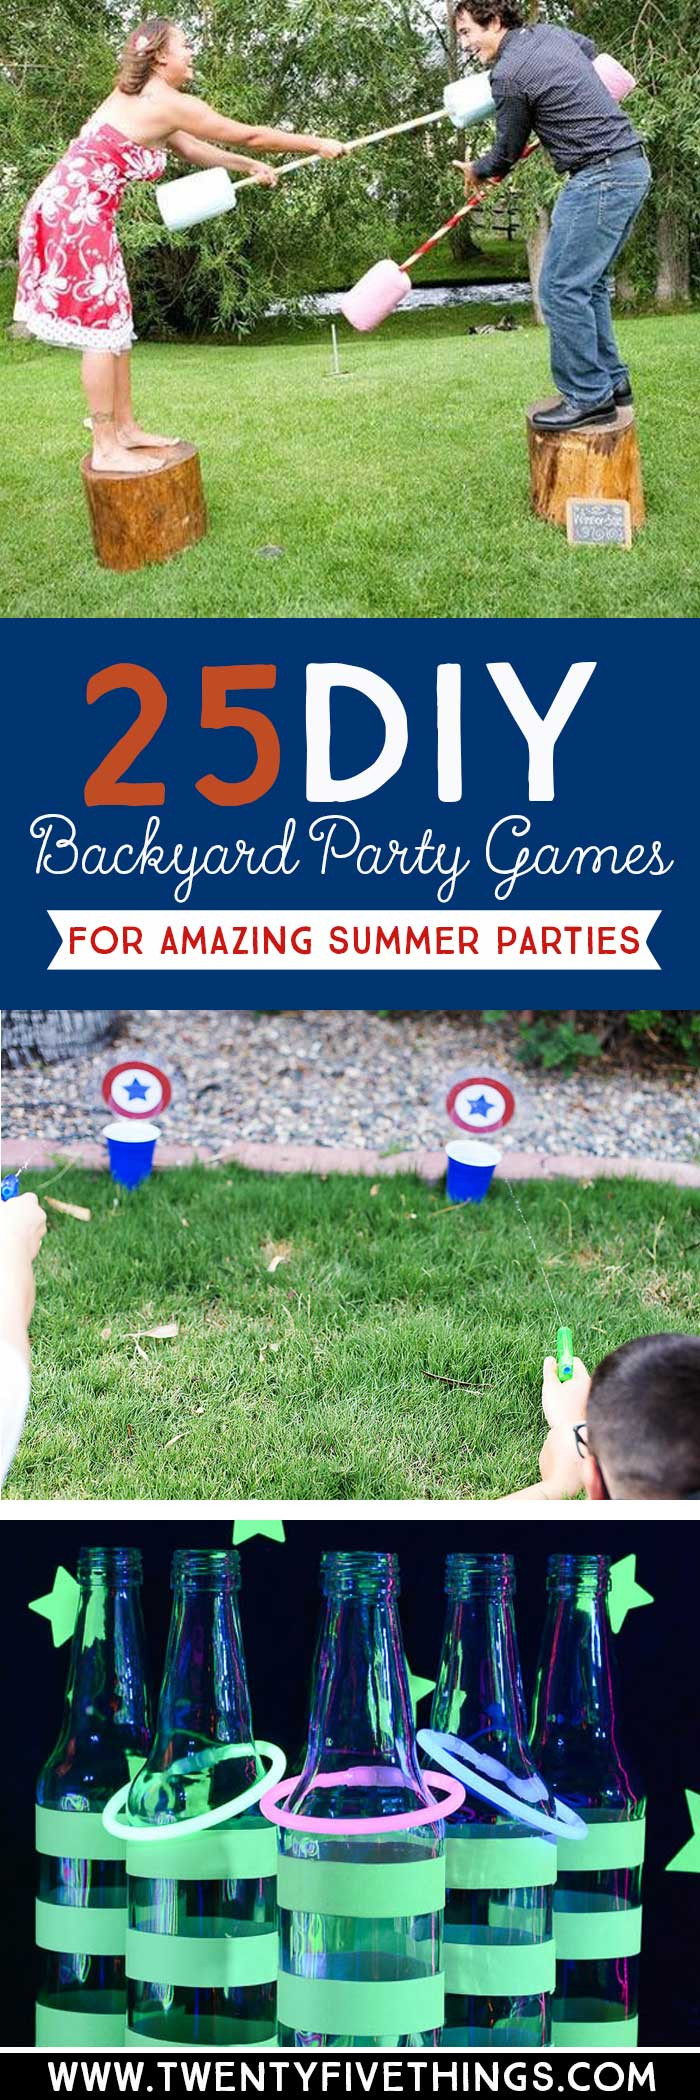 Backyard Party Games Ideas
 25 DIY Backyard Party Games for the Best Summer Party Ever